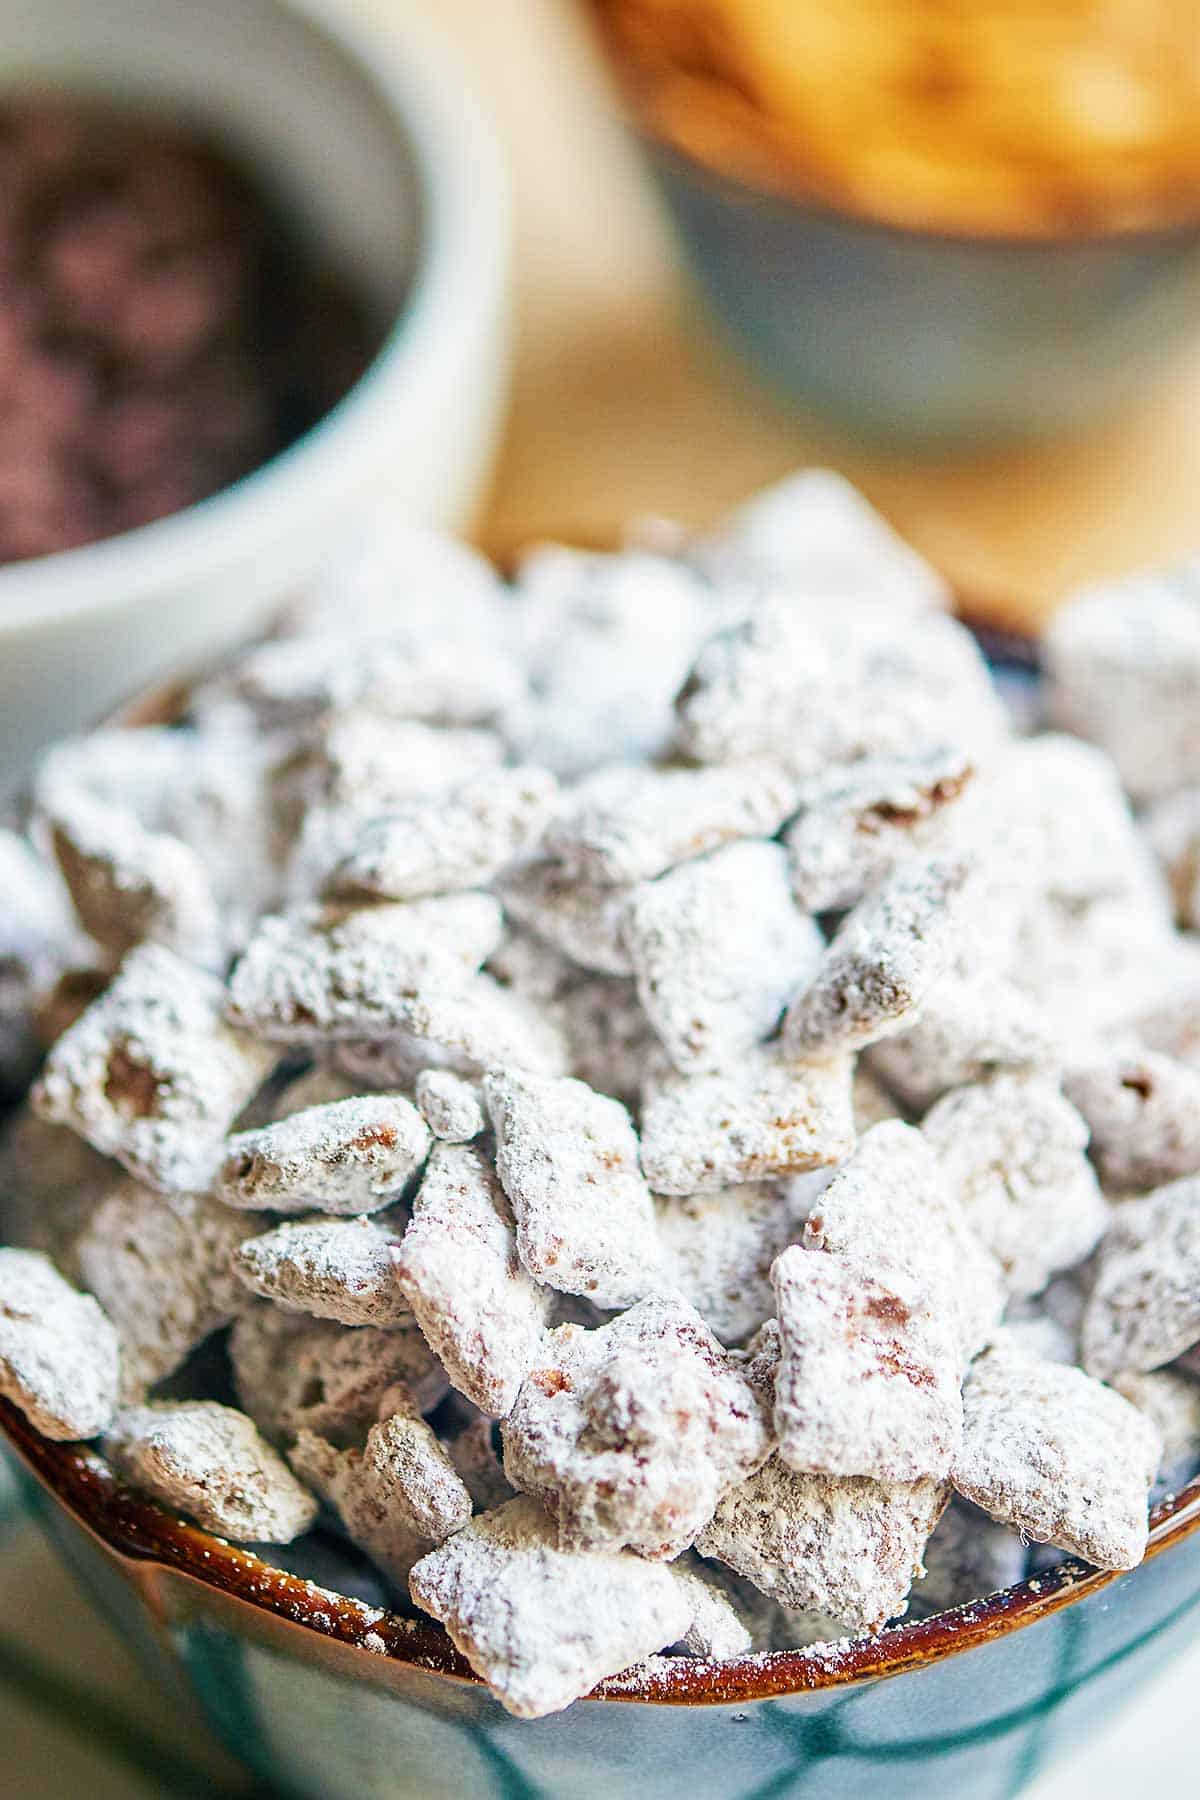 Bowl of puppy chow